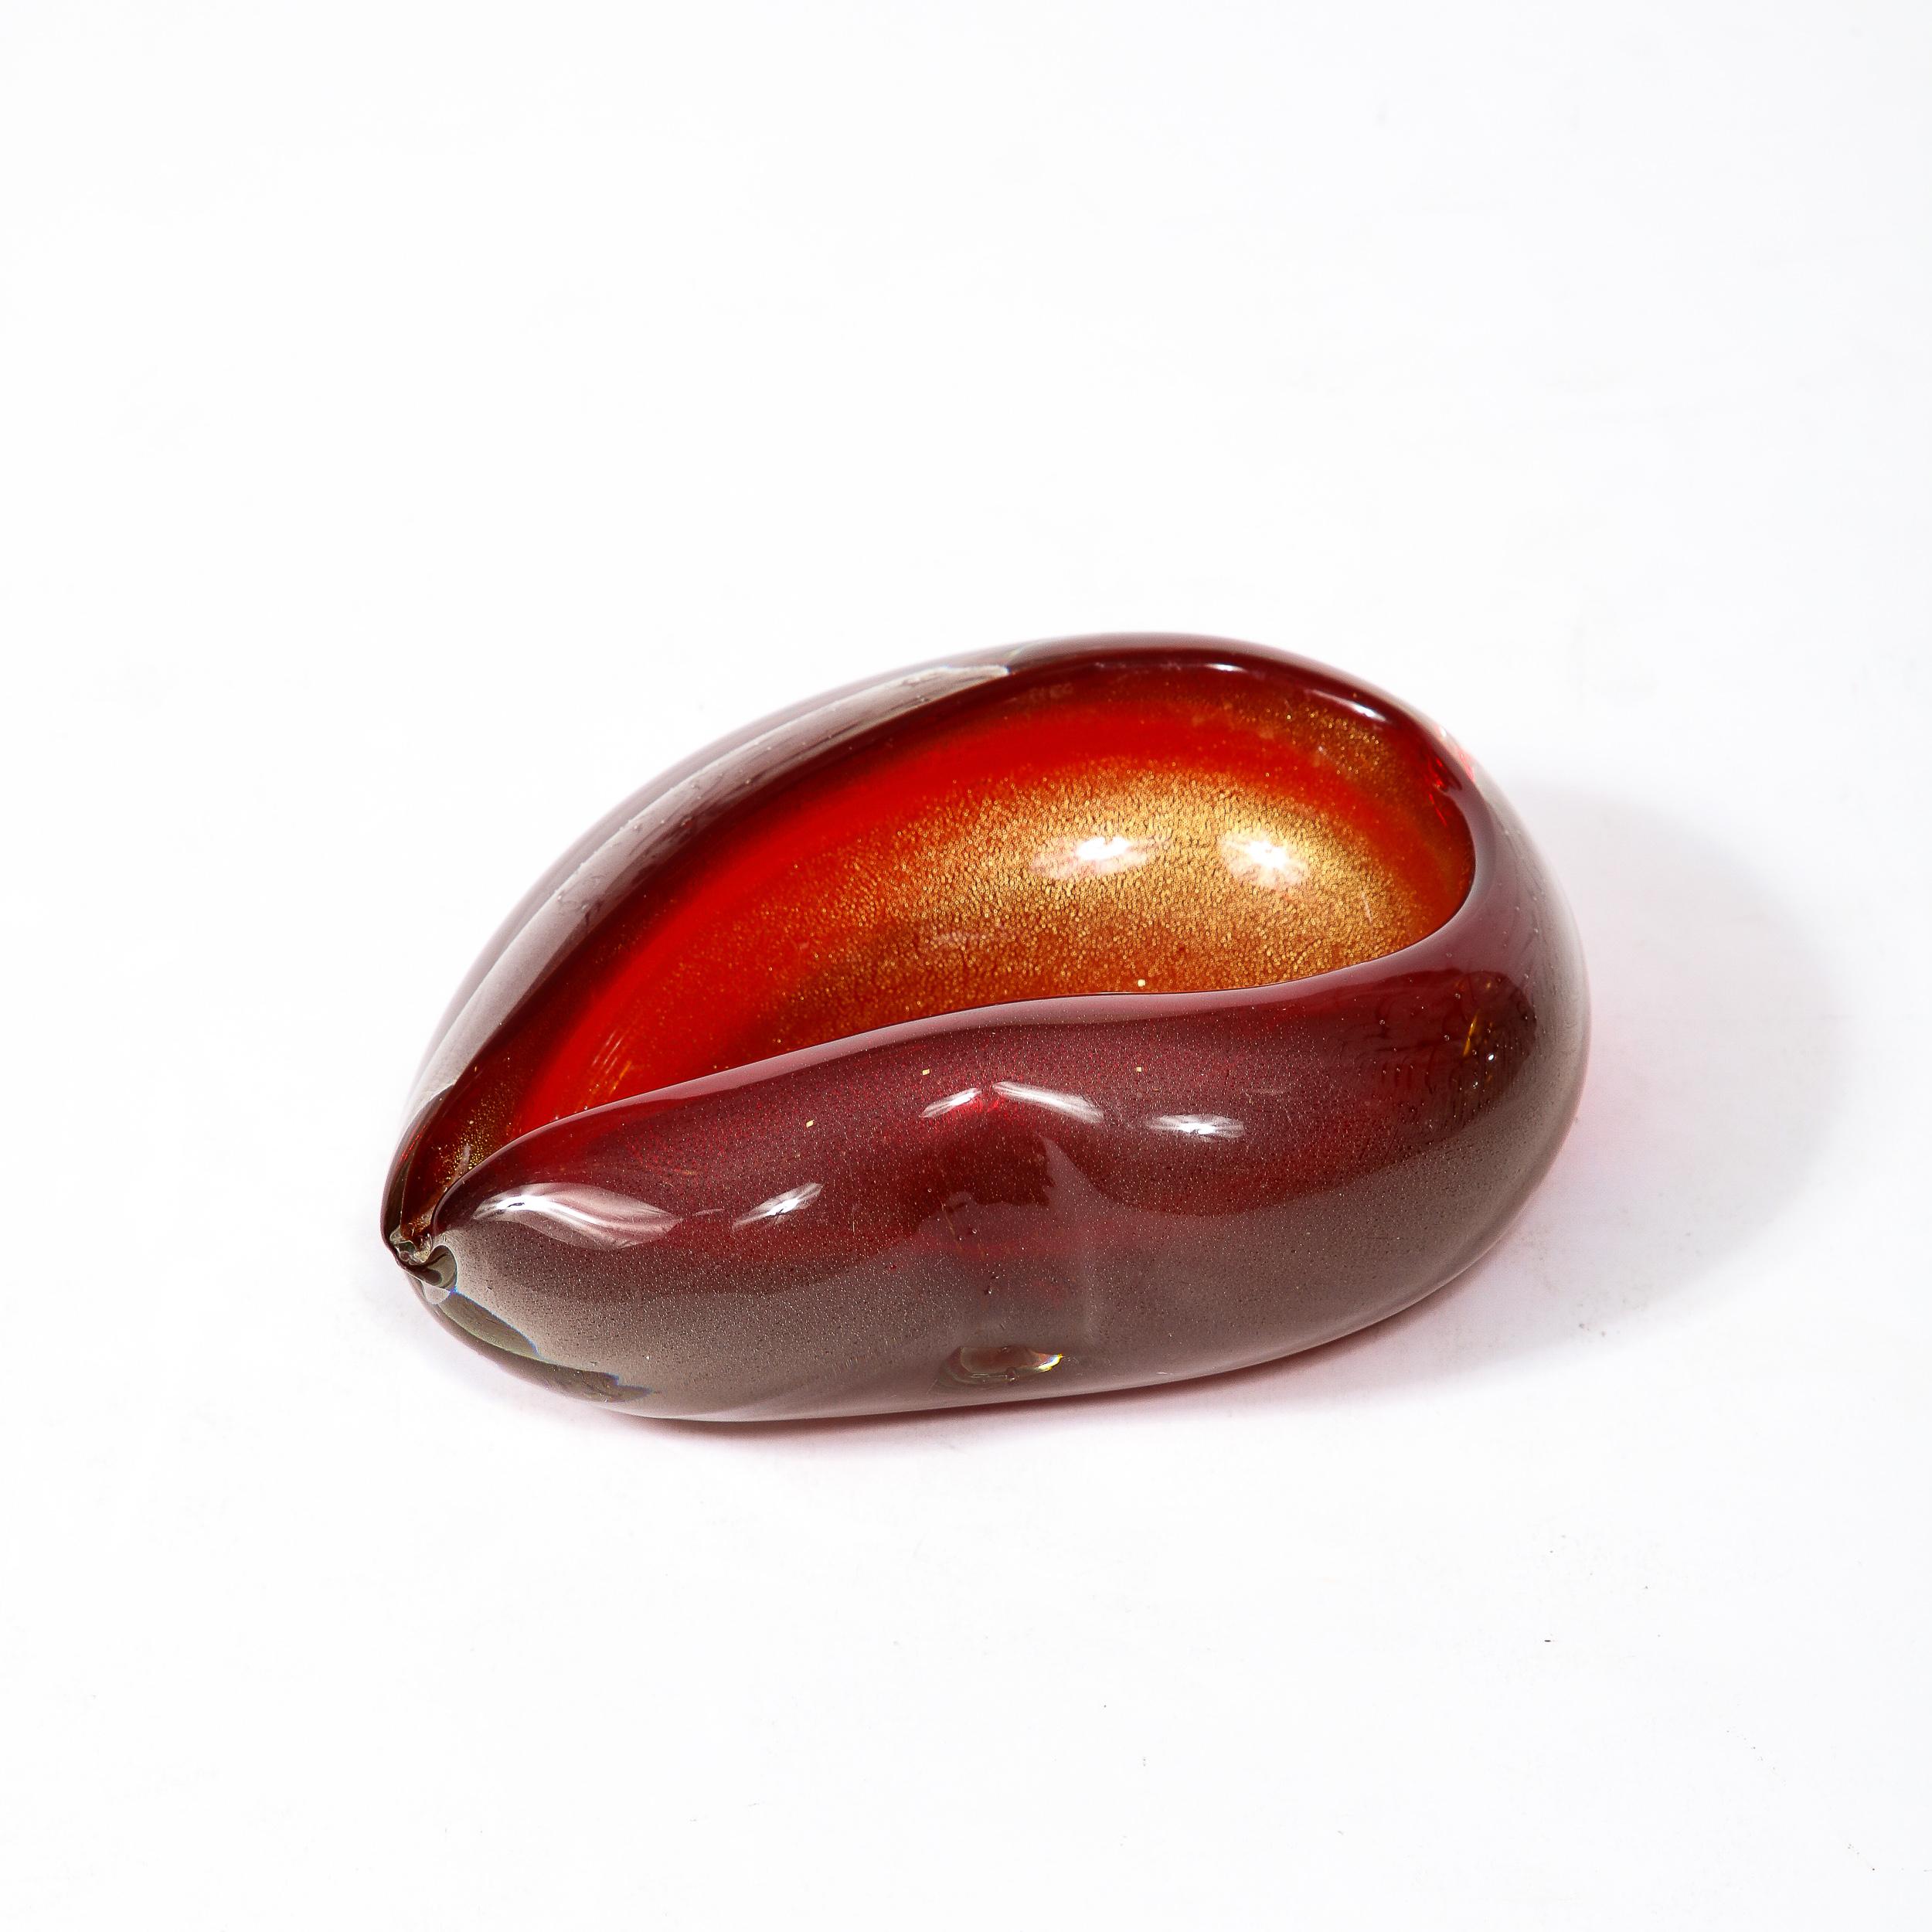 -This Mid-Century Modernist Murano Glass Dish was made in Italy, Circa 1960. Hand Blown in a deep ruby hued glass with a subtle impression and single lip detail that shape the piece, the sunken basin contains glittering 24Karat Gold Flakes.